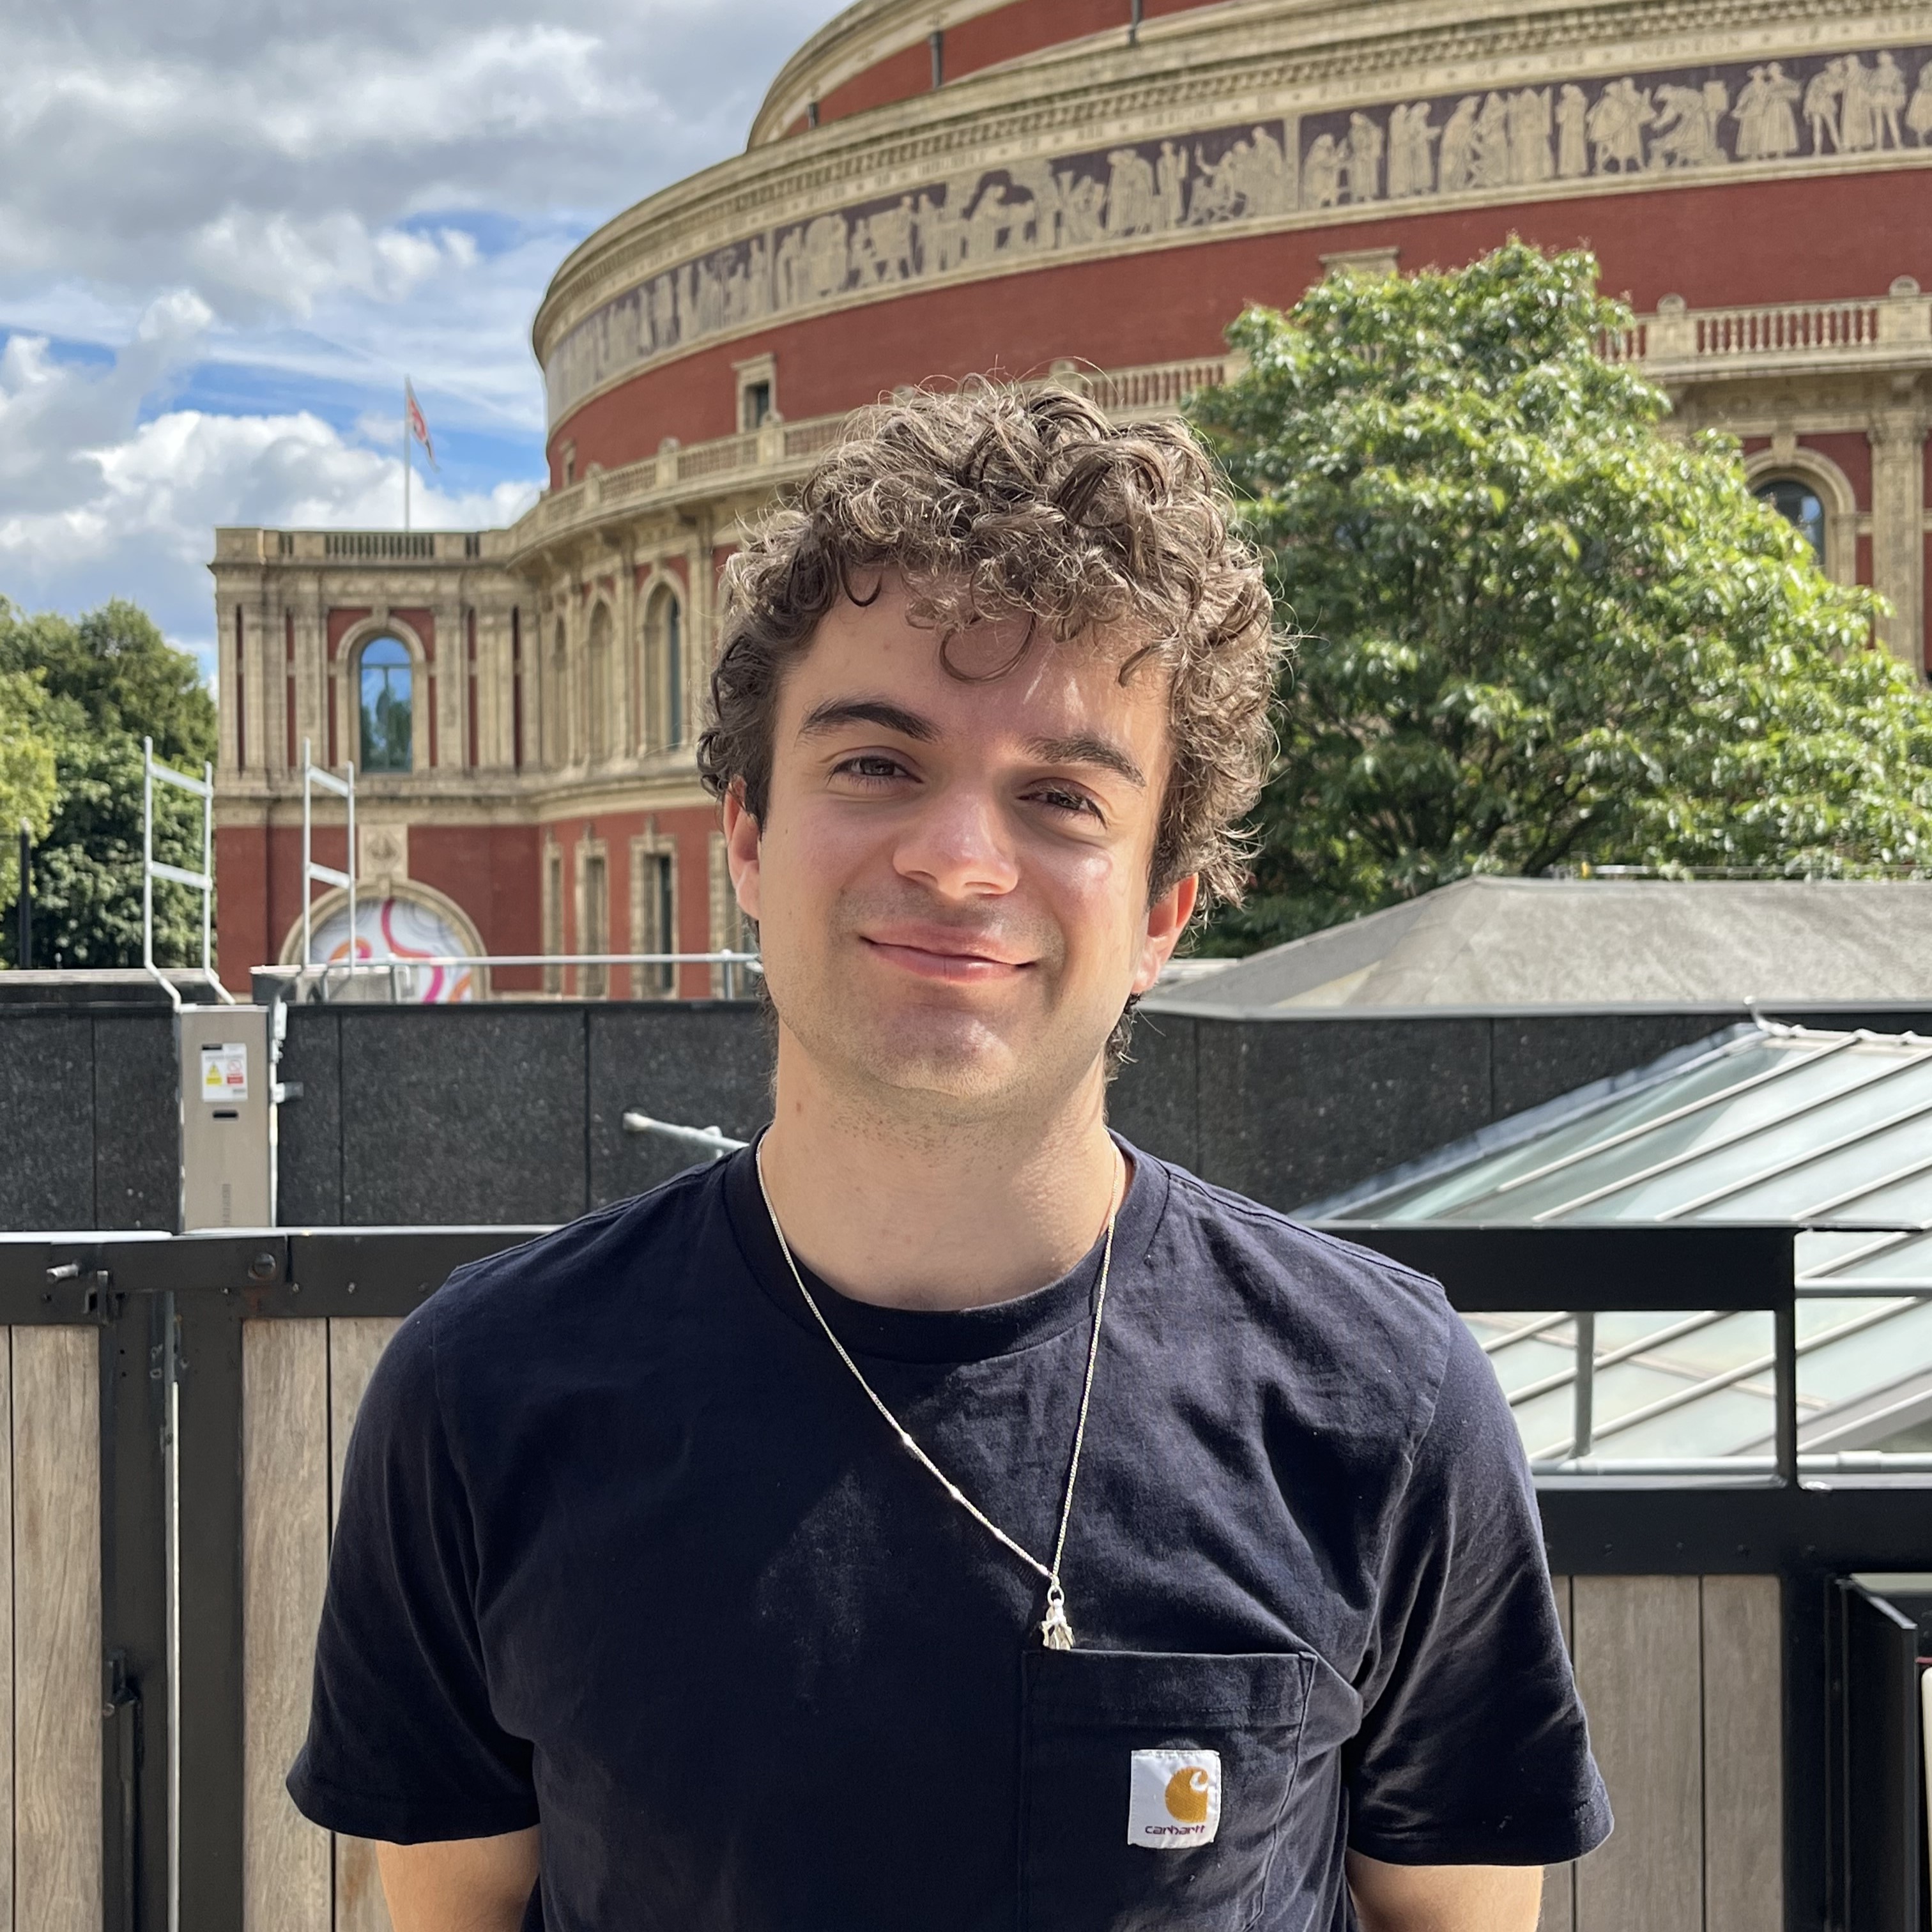 A photograph of Thomas stood in front of the Royal Albert Hall